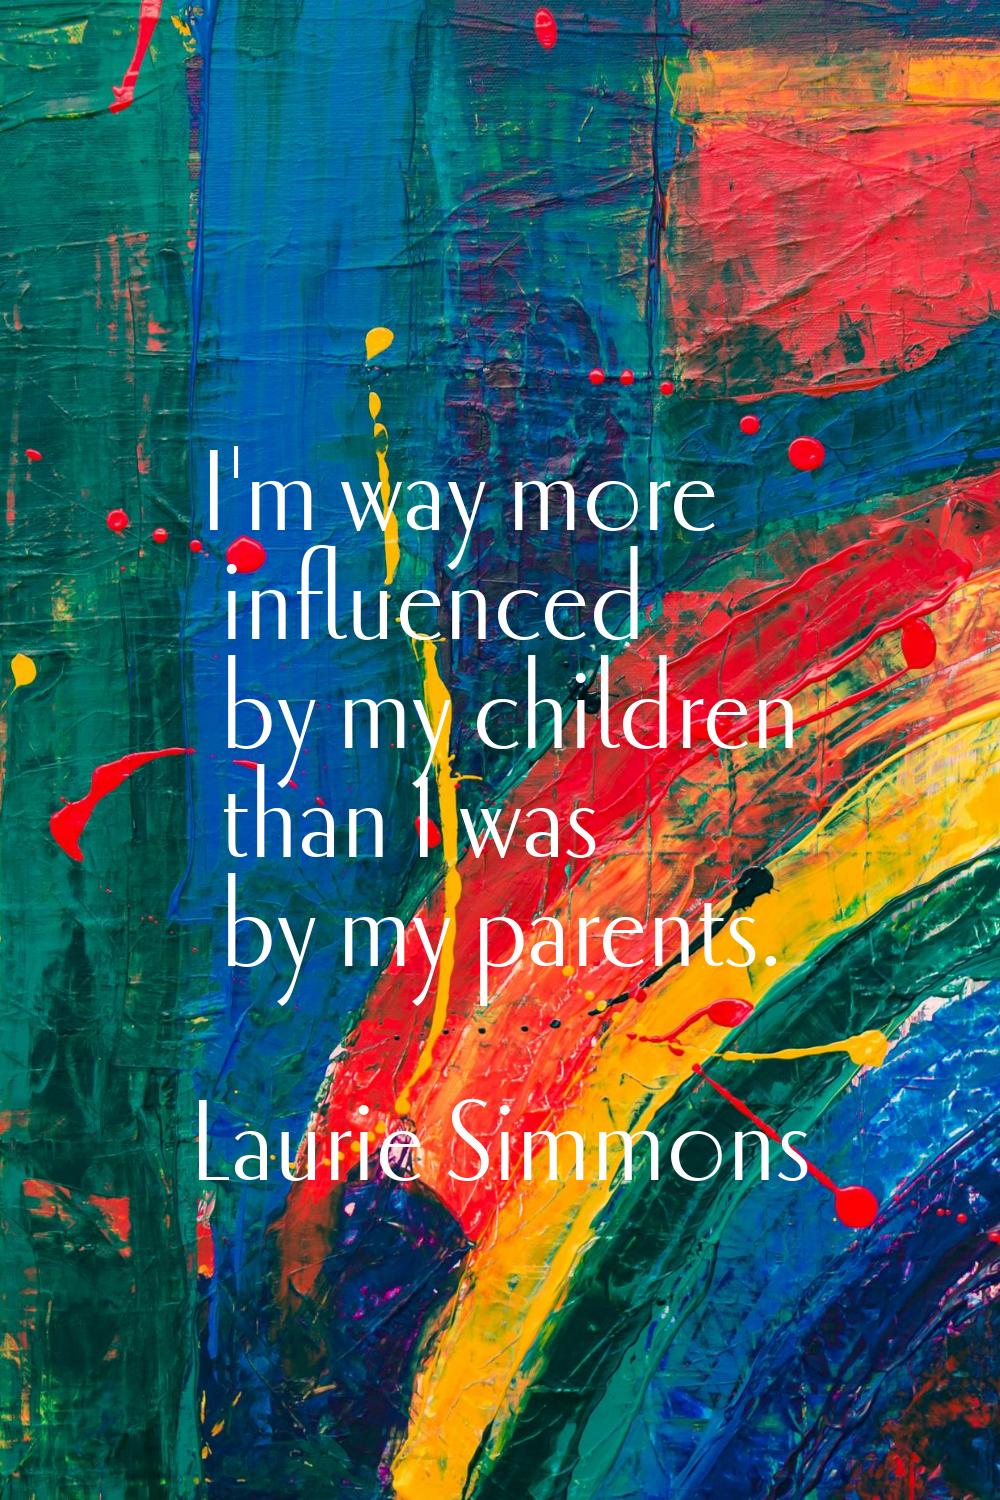 I'm way more influenced by my children than I was by my parents.